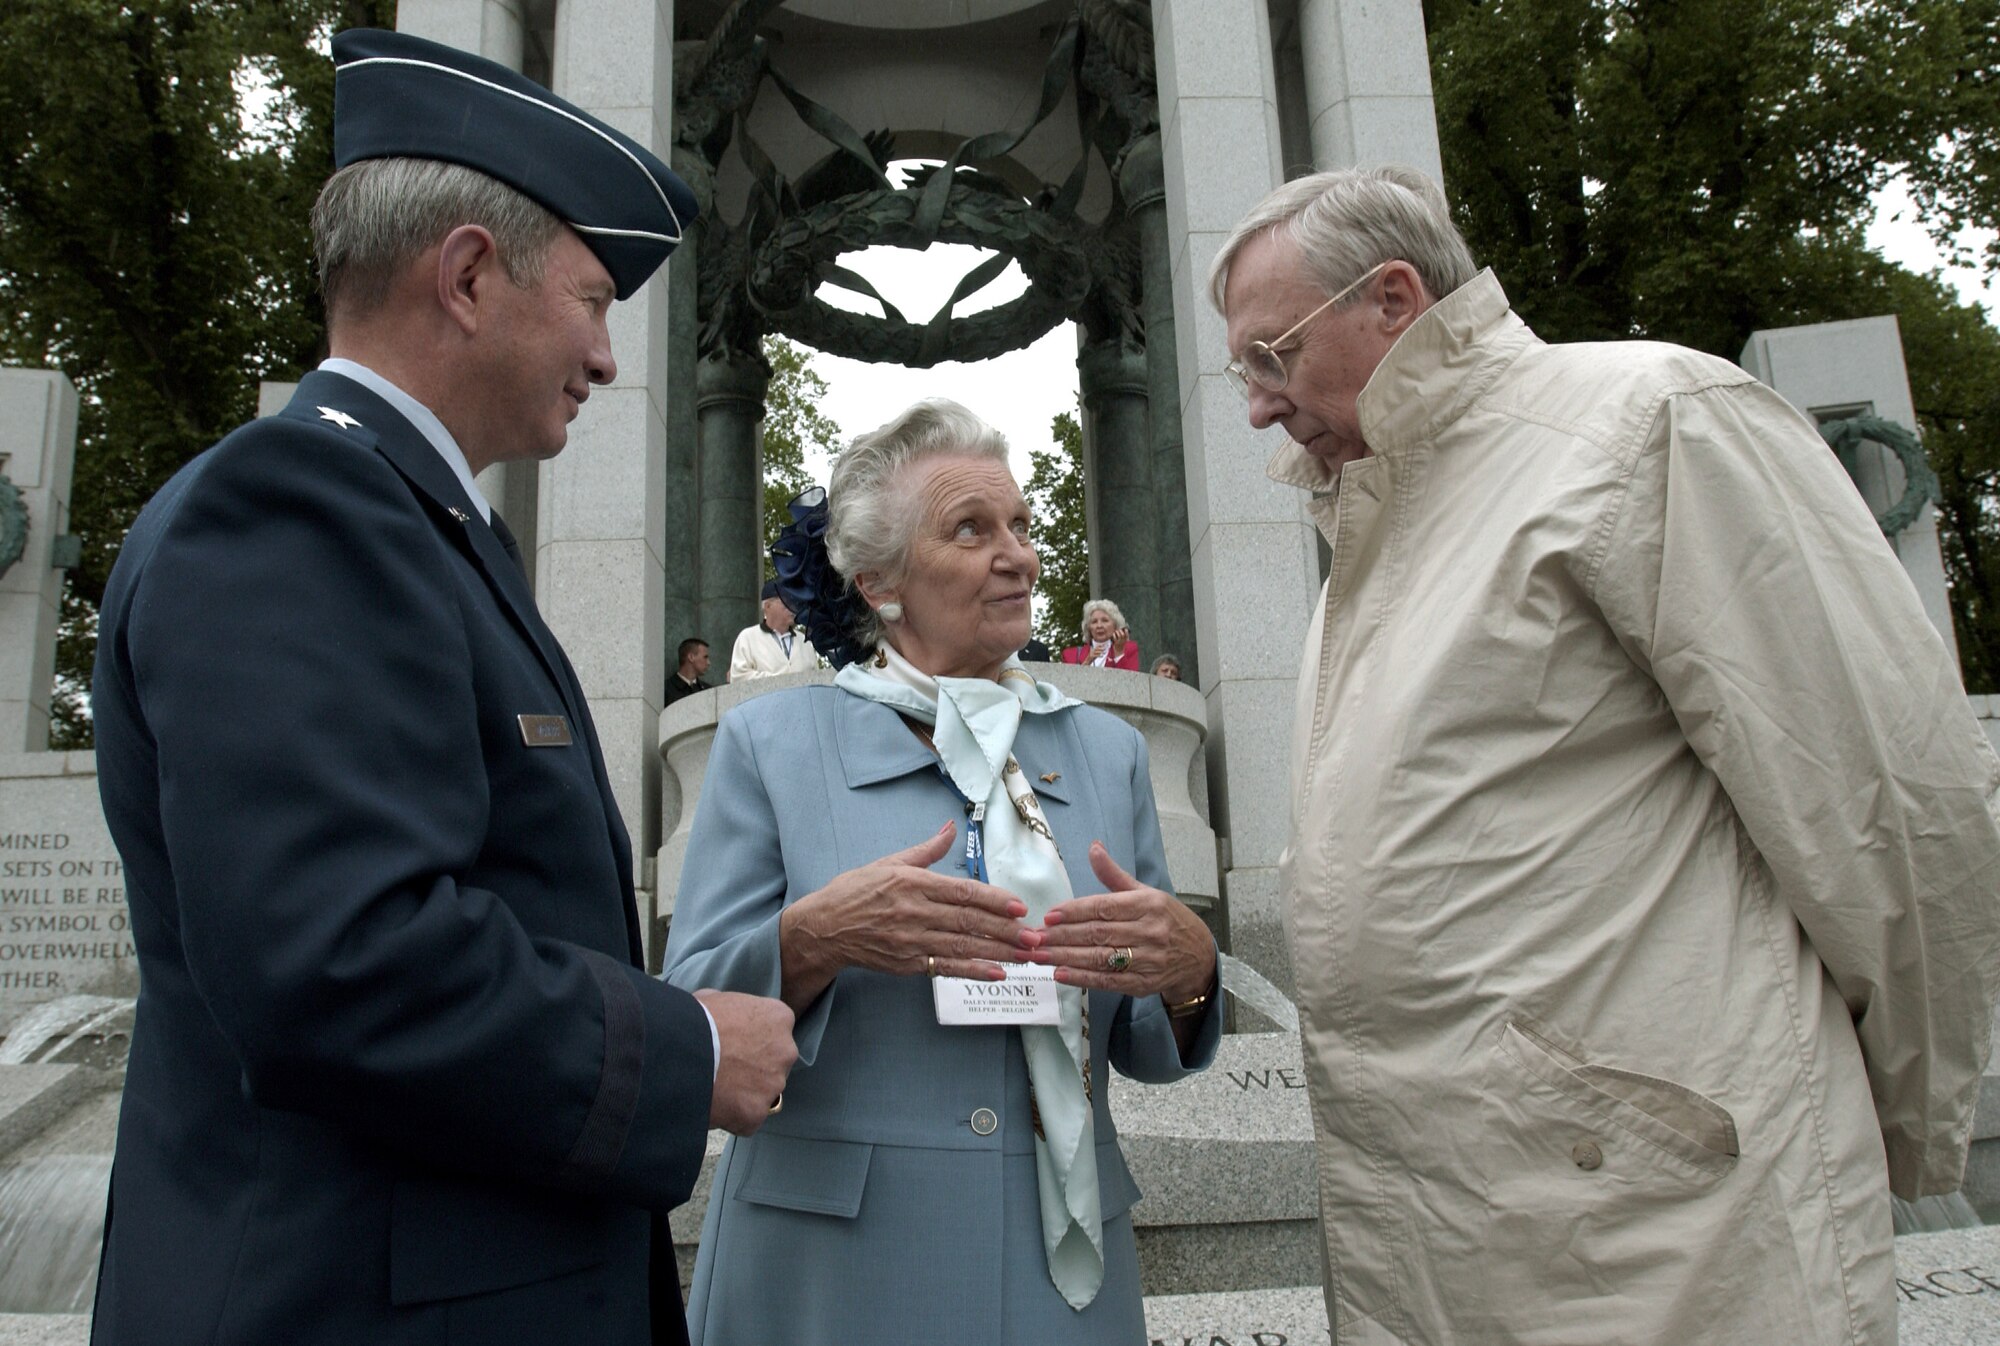 WASHINGTON -- Secretary of the Air Force Dr. James G. Roche (right) visits with Yonne Daley (center) and Lt. Gen. Duncan J. McNabb, deputy chief of staff for plans and programs, while at the newly opened World War II Memorial here May 3.  Ms. Daley who had organized the tour and General McNabb, who sponsored the group, were with members of the Air Forces Escape and Evasion Society.  The society comprises both U.S. Airmen who successfully evaded capture after bailing out of their aircraft over Europe in World War II and a number of the European civilians who helped them.  (U.S. Air Force by Master Sgt. Jim Varhegyi) 